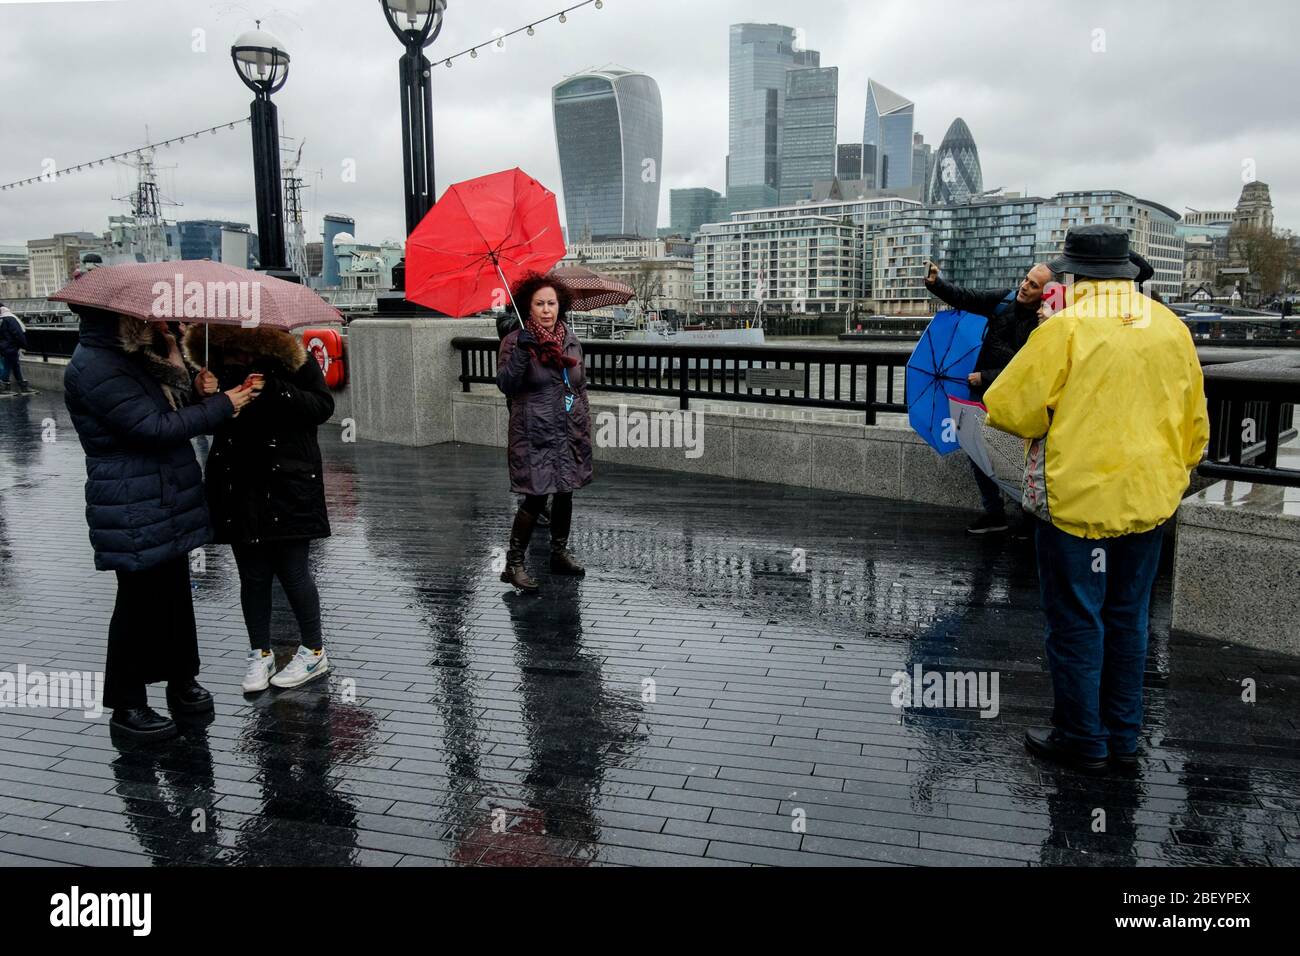 Tourists in London during rain downpour. Stock Photo